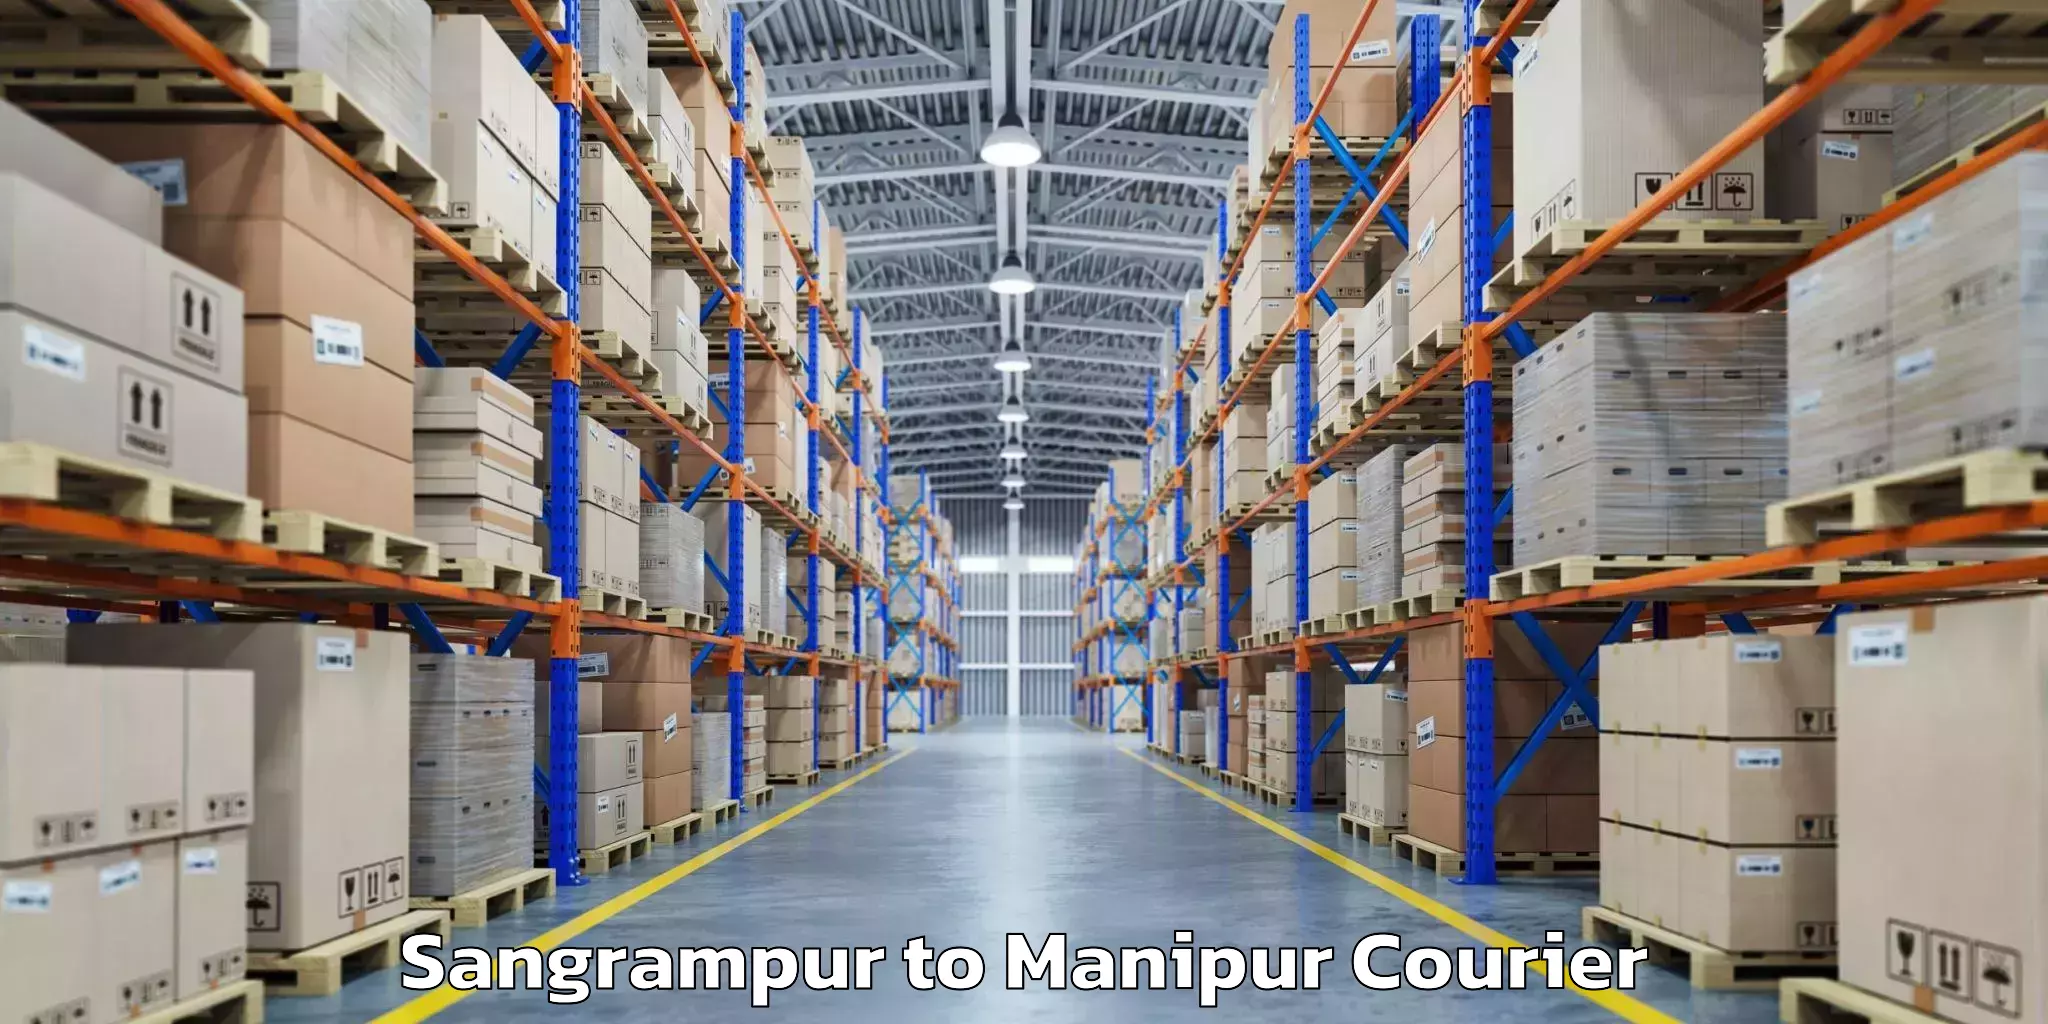 Luggage delivery network Sangrampur to Manipur